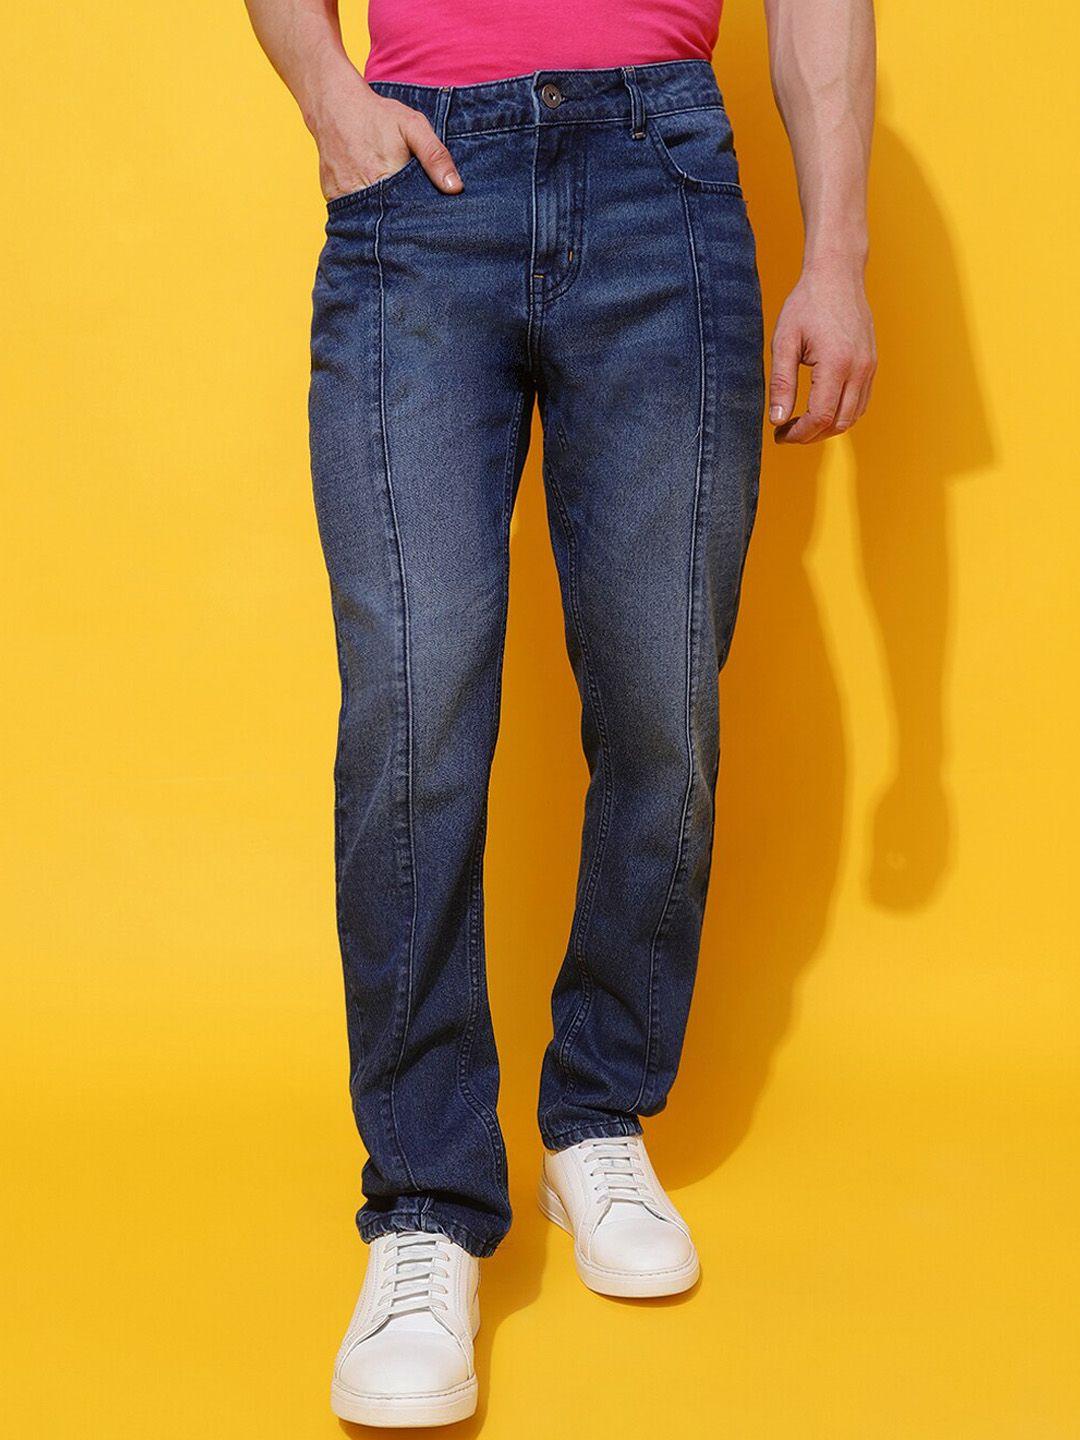 belliskey-men-relaxed-fit-light-fade-stretchable-cotton-jeans